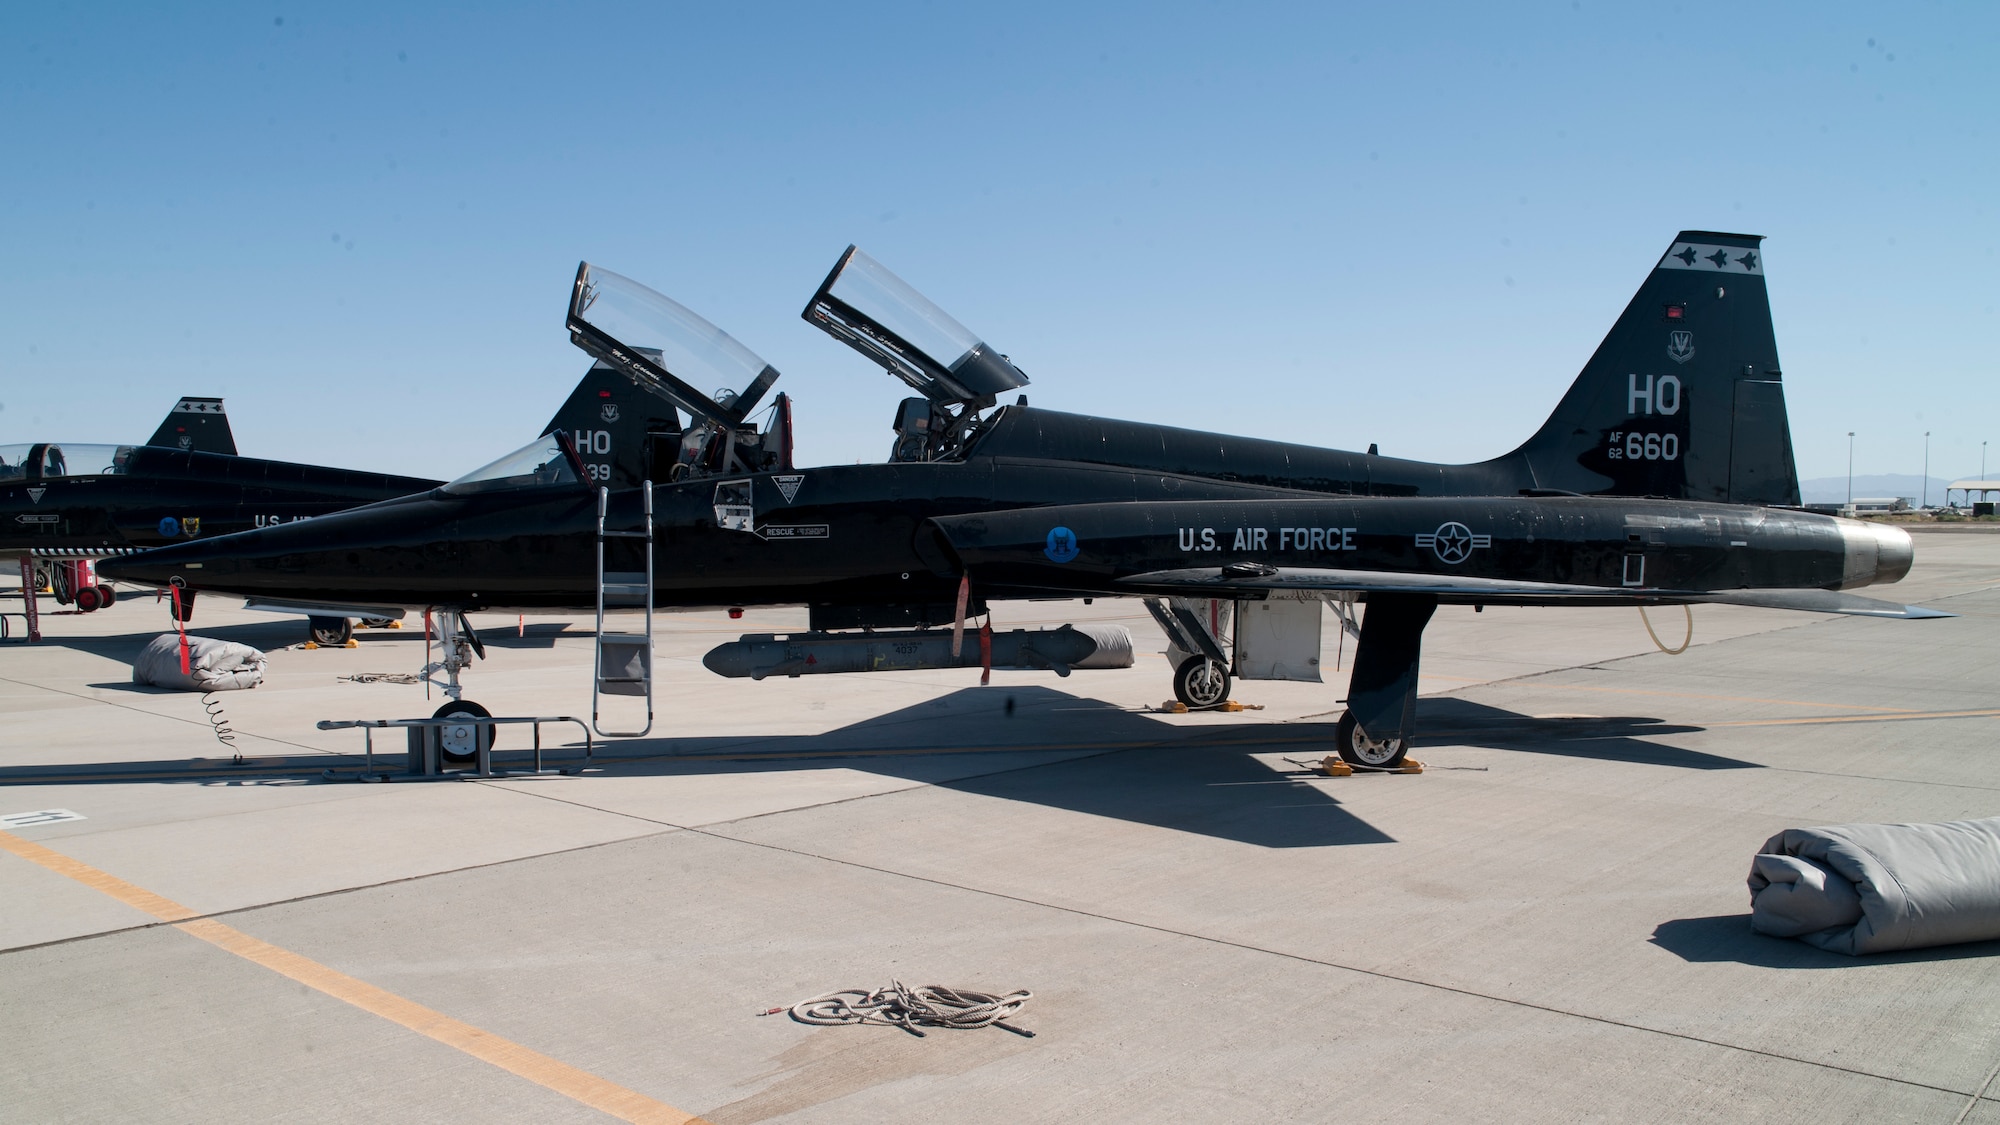 The T-38 Talon is shown equipped with ALQ-188 pod at Holloman Air Force Base, N.M., Jun 4. For the first time, the T-38 has been modified to fit the ALQ-188 Pod for use as a radar jammer. This newest addition to the T-38 will allow assist in its training mission by making it a more effective adversary for the F-22 Raptor during simulated combat exercises. (U.S. Air Force photo by Airman 1st Class Daniel E. Liddicoet/Released)

